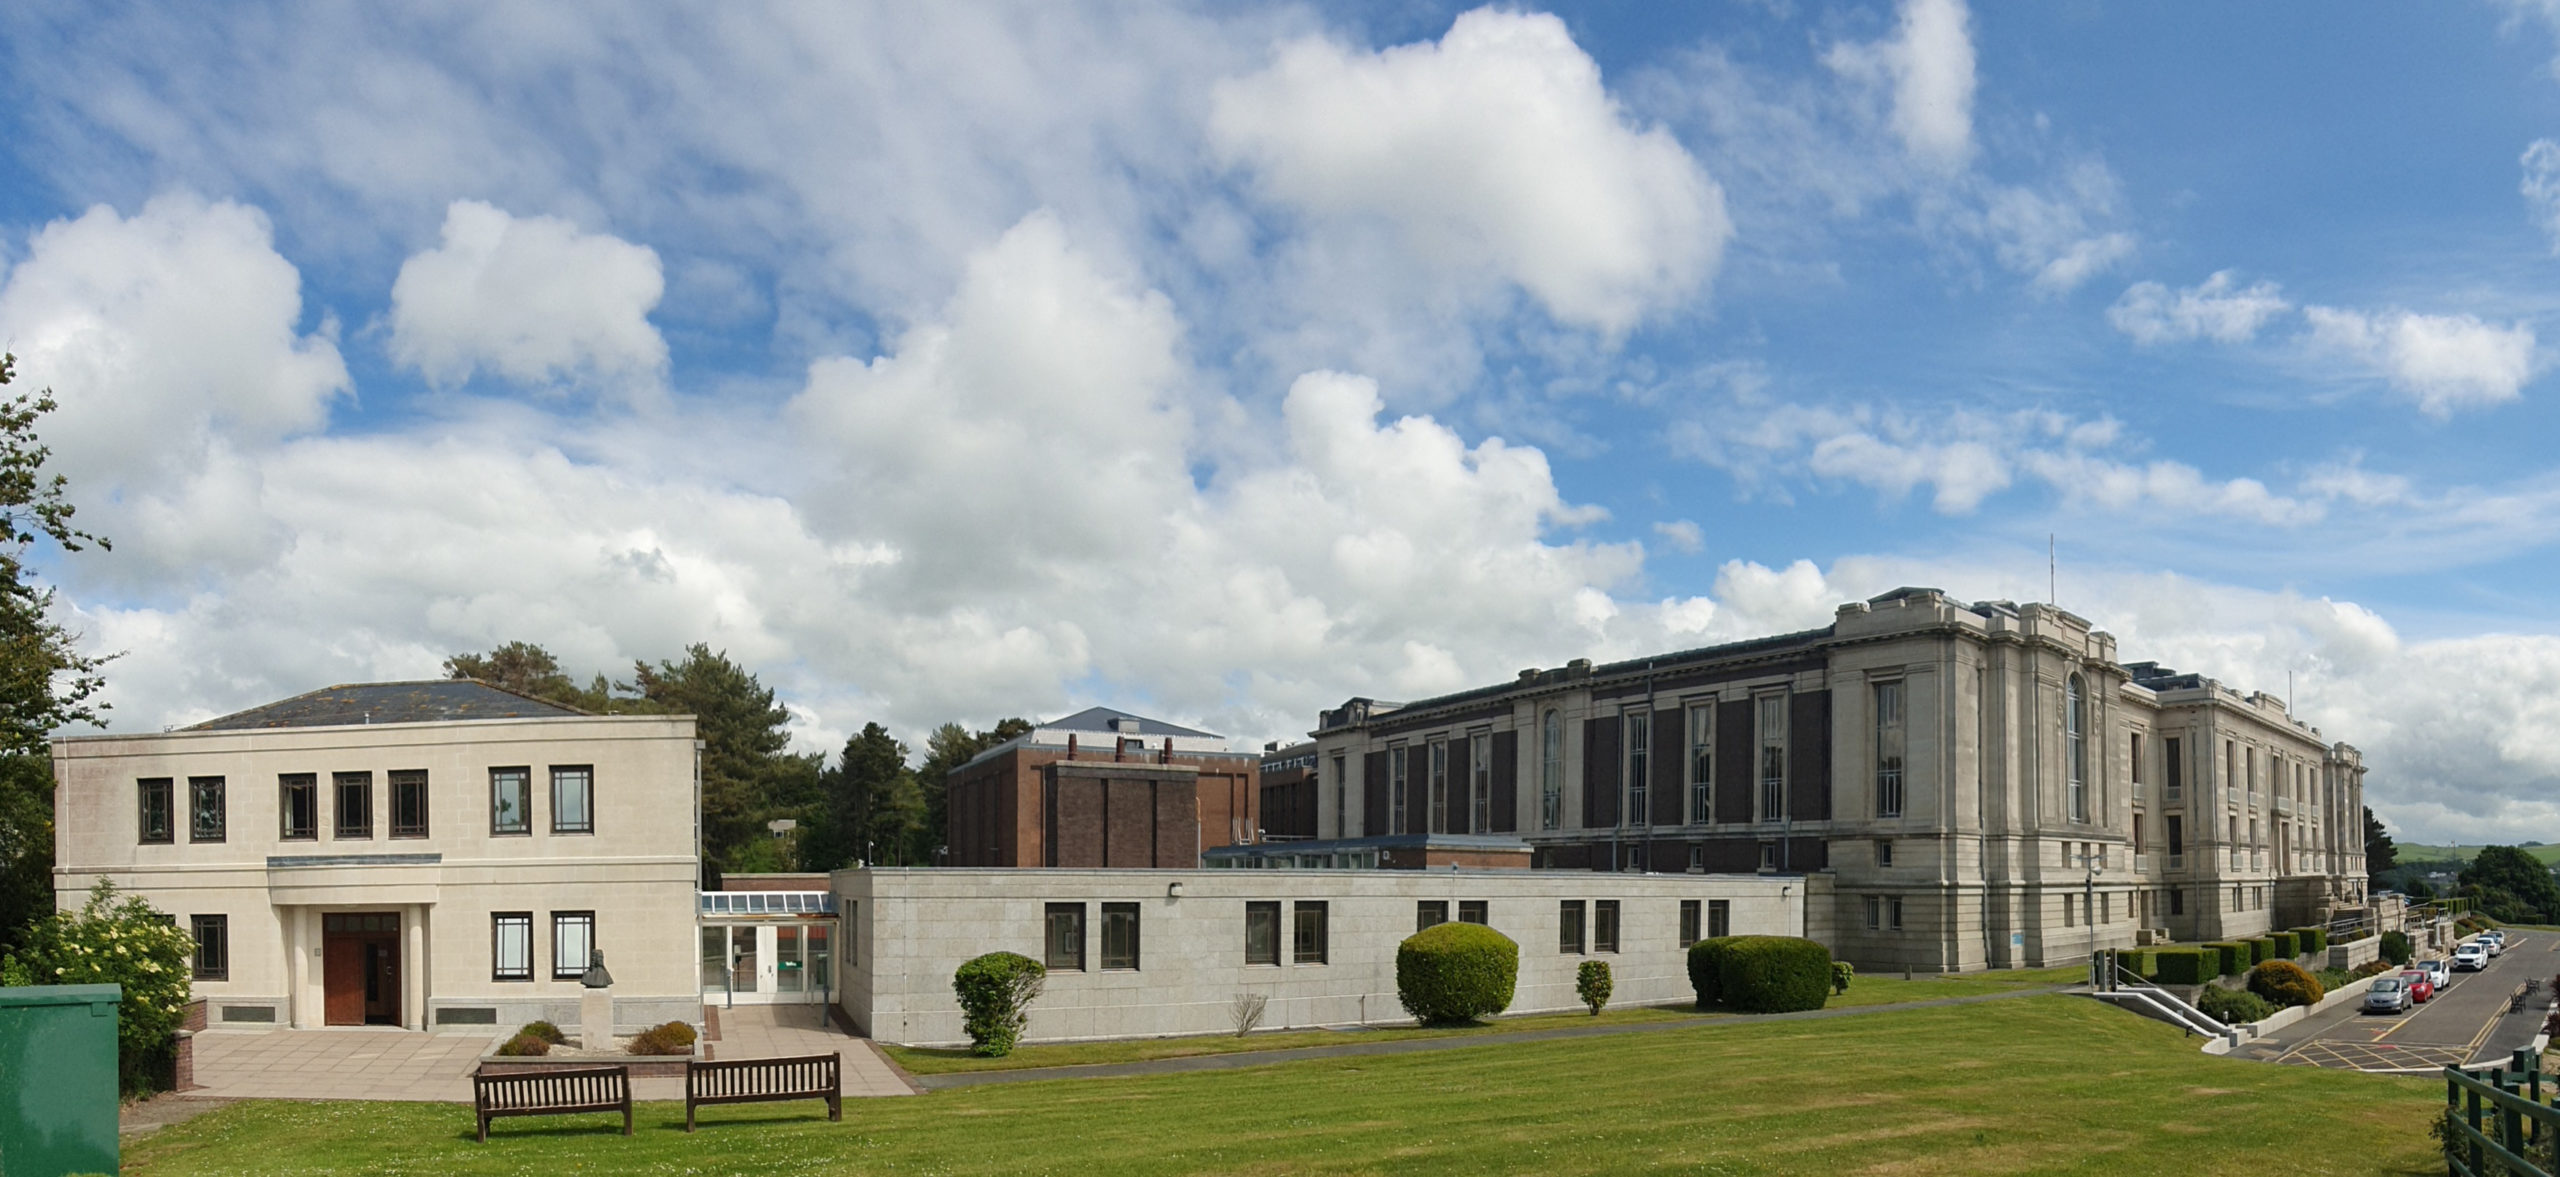 The Centre for Advanced Welsh & Celtic Studies (CAWCS) et The National Library of Wales